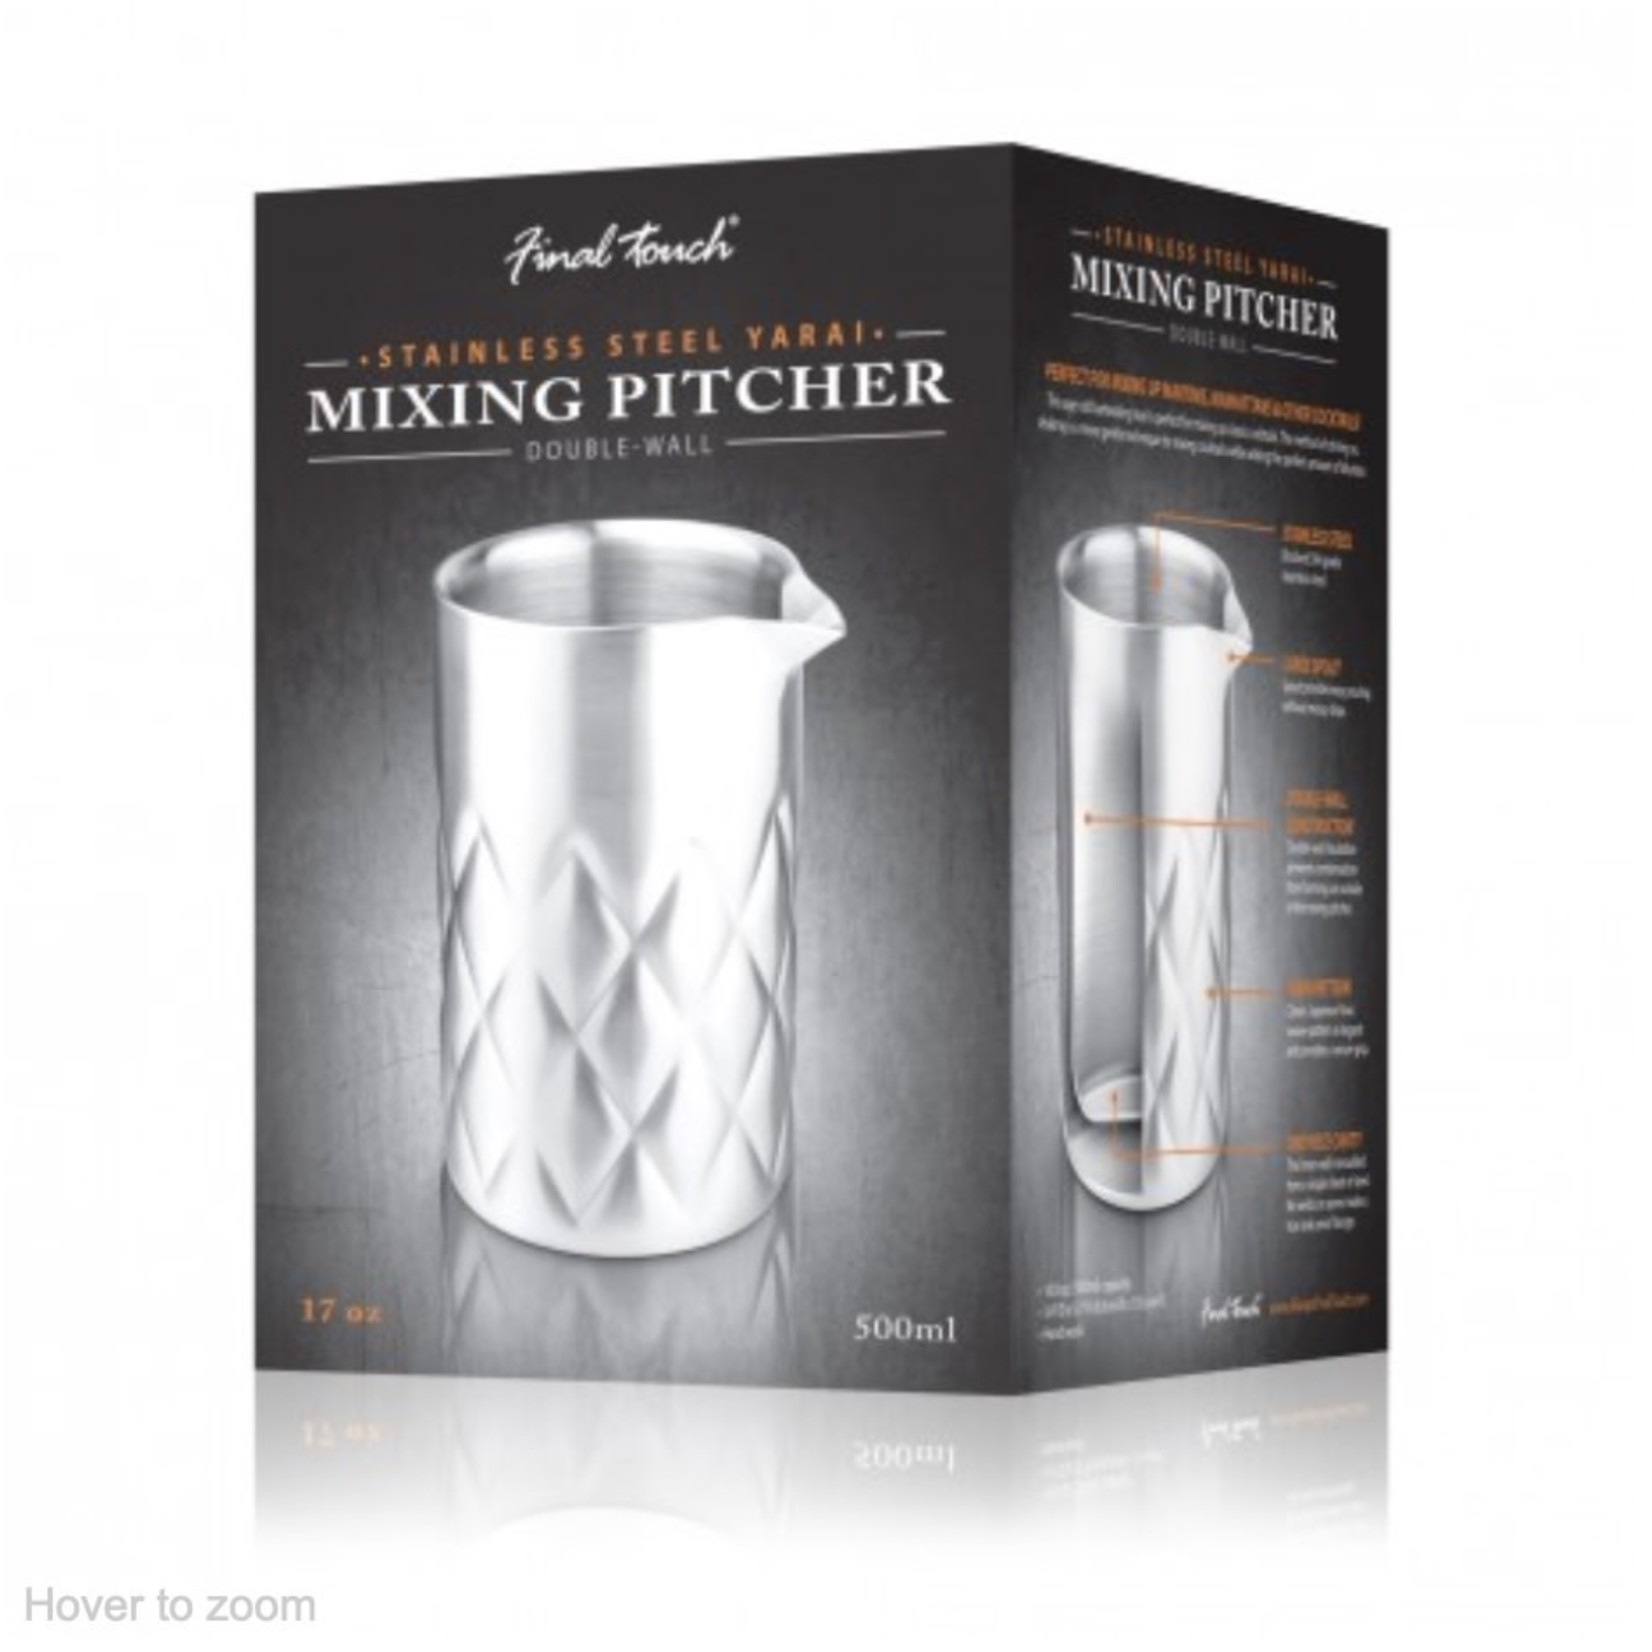 FINAL TOUCH FINAL TOUCH Yarai Mixing Pitcher - Stainless